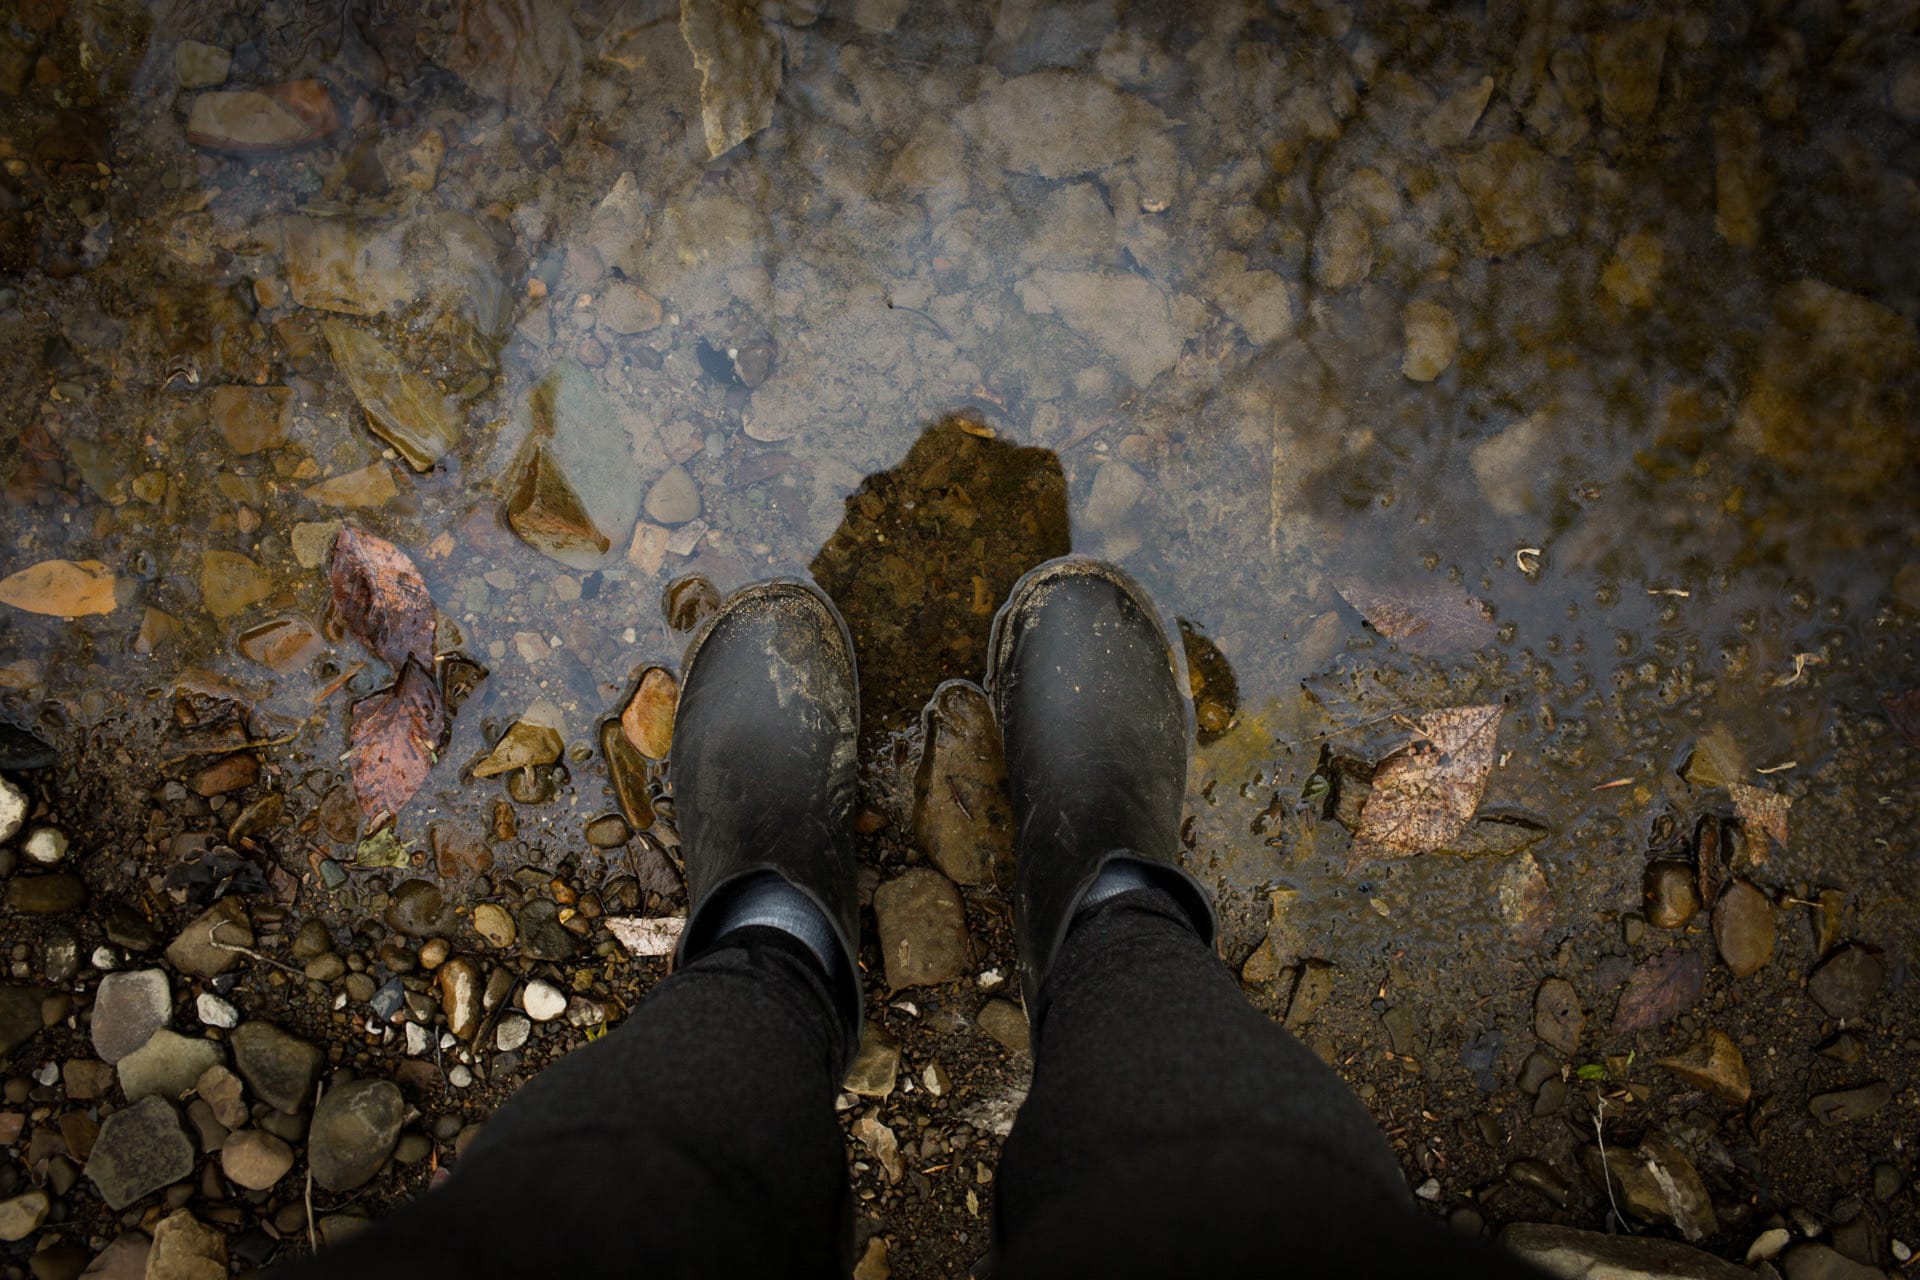 Looking down at my rain boots while I am standing in a shallow pool of water in the woods. It is muddy, rocky, and there are leaves around my feet.